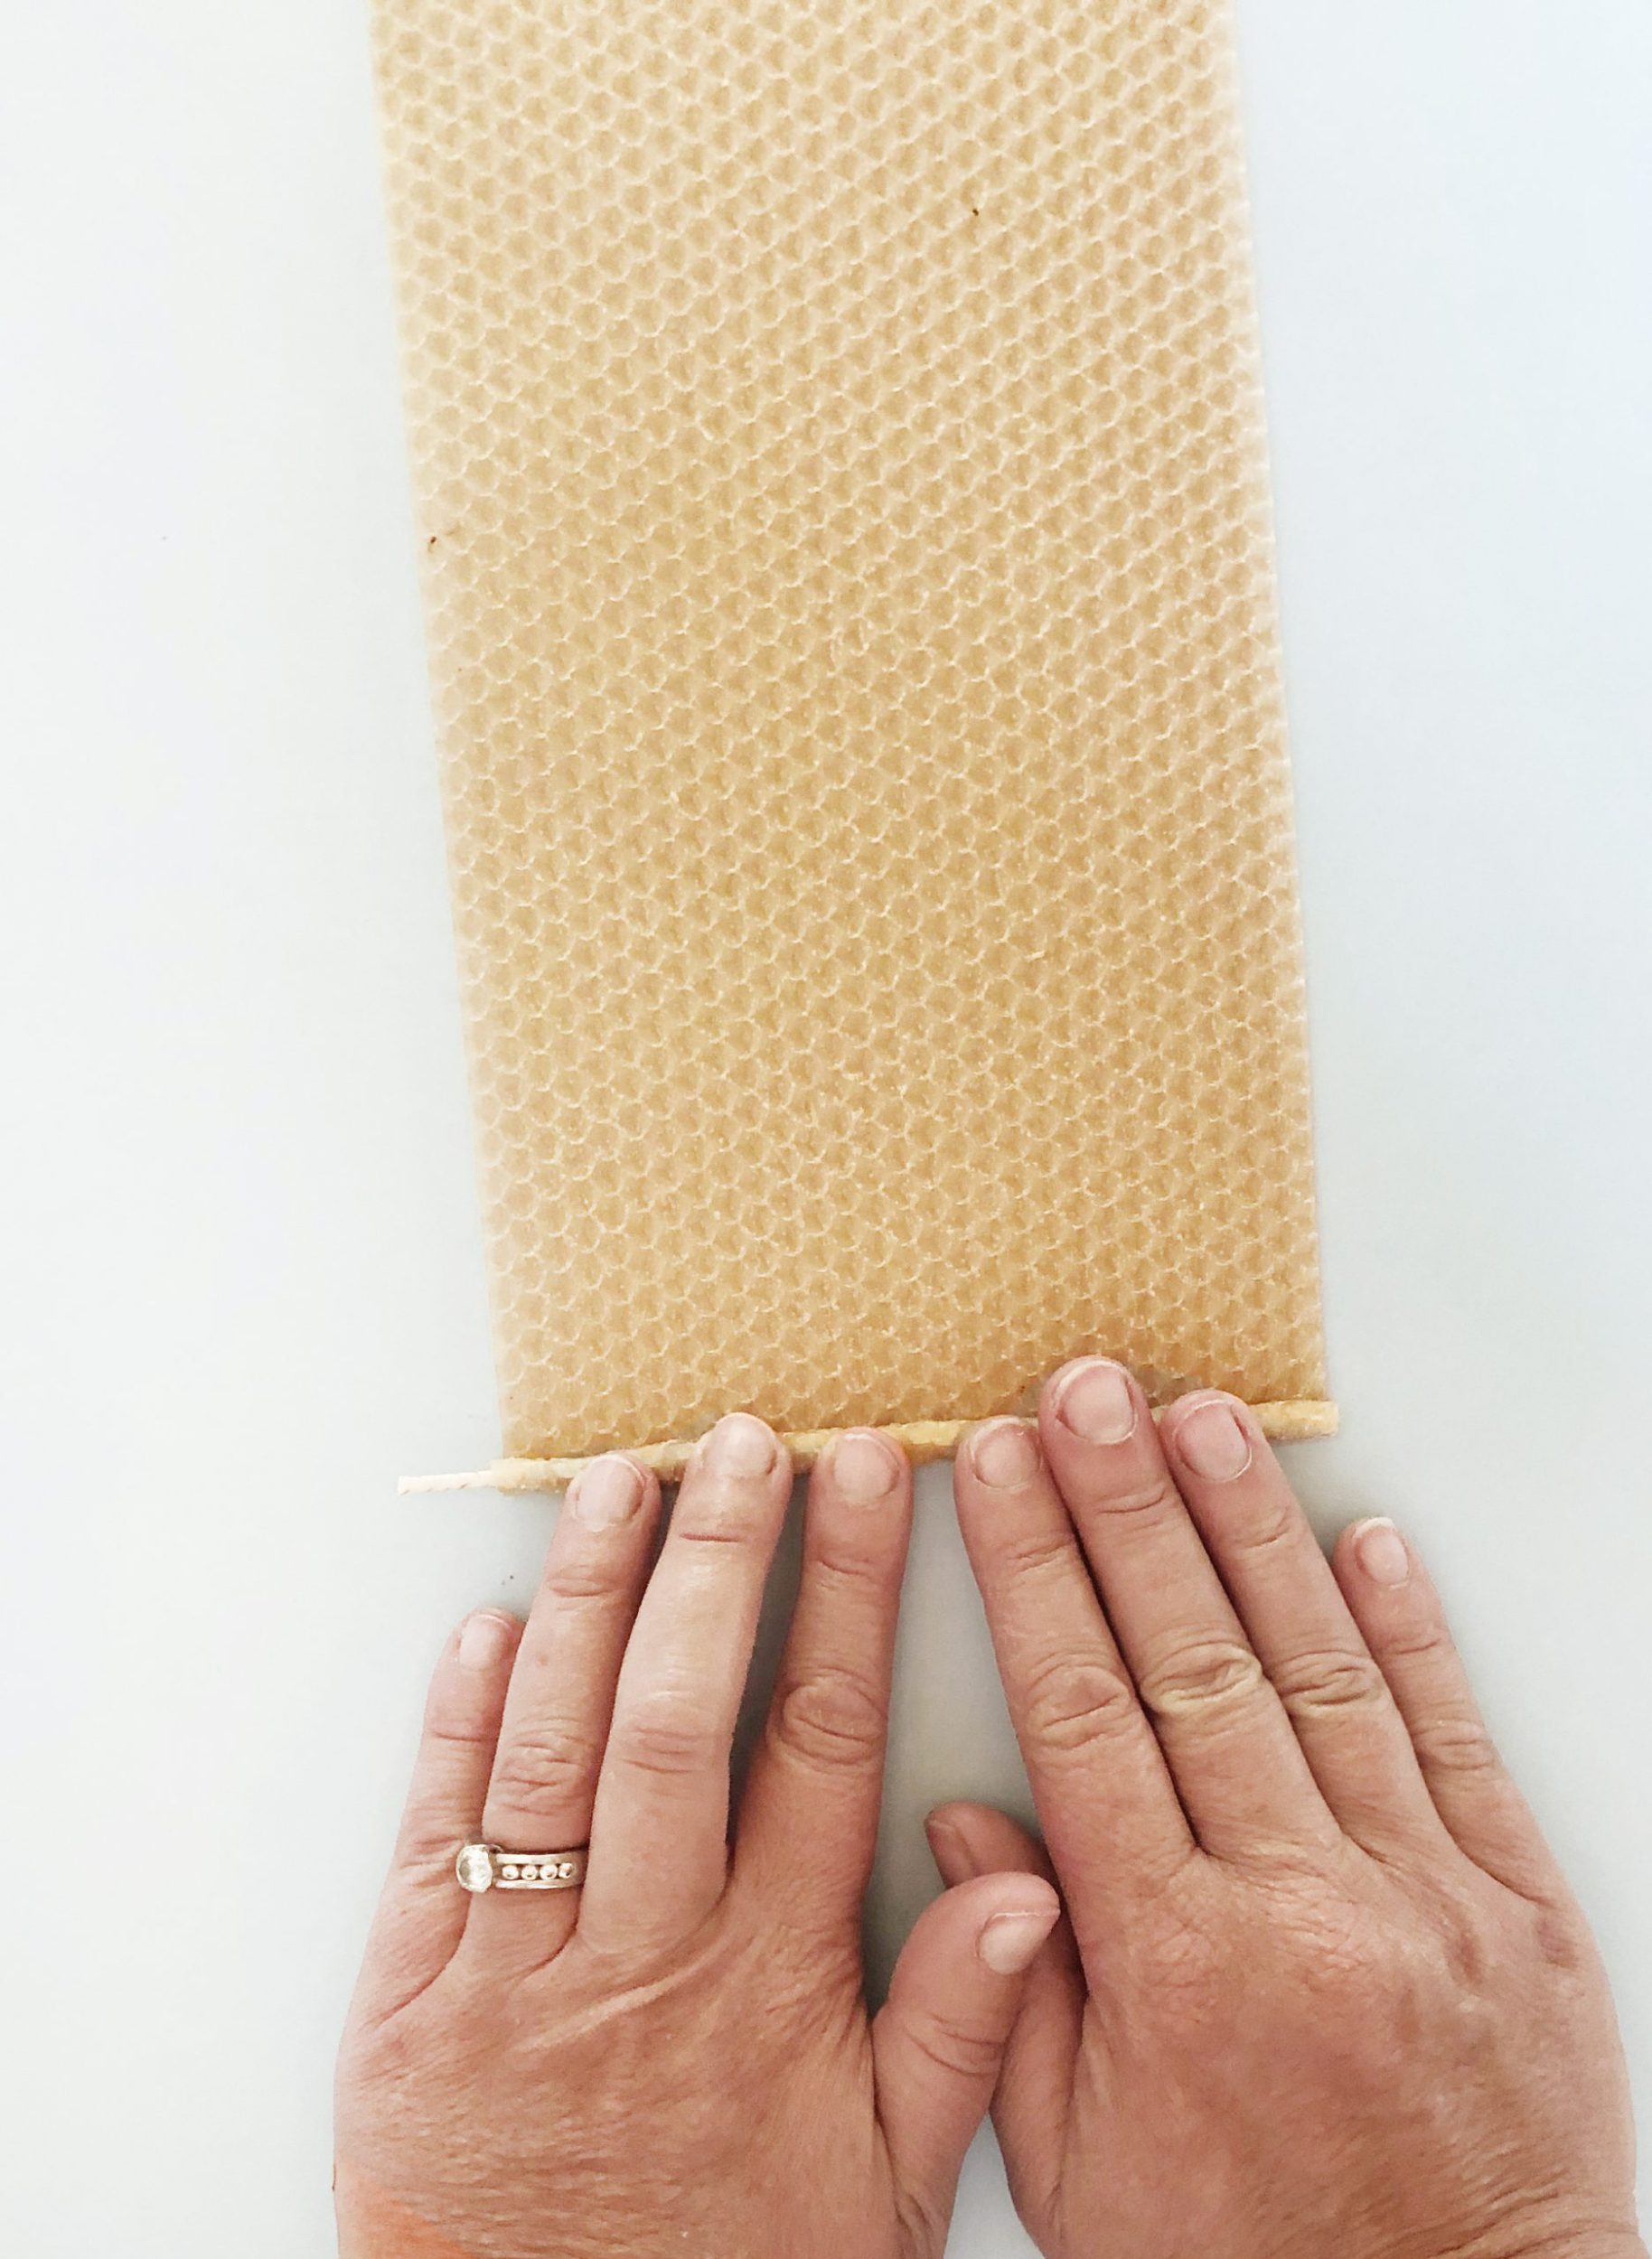 Two hands rolling beeswax